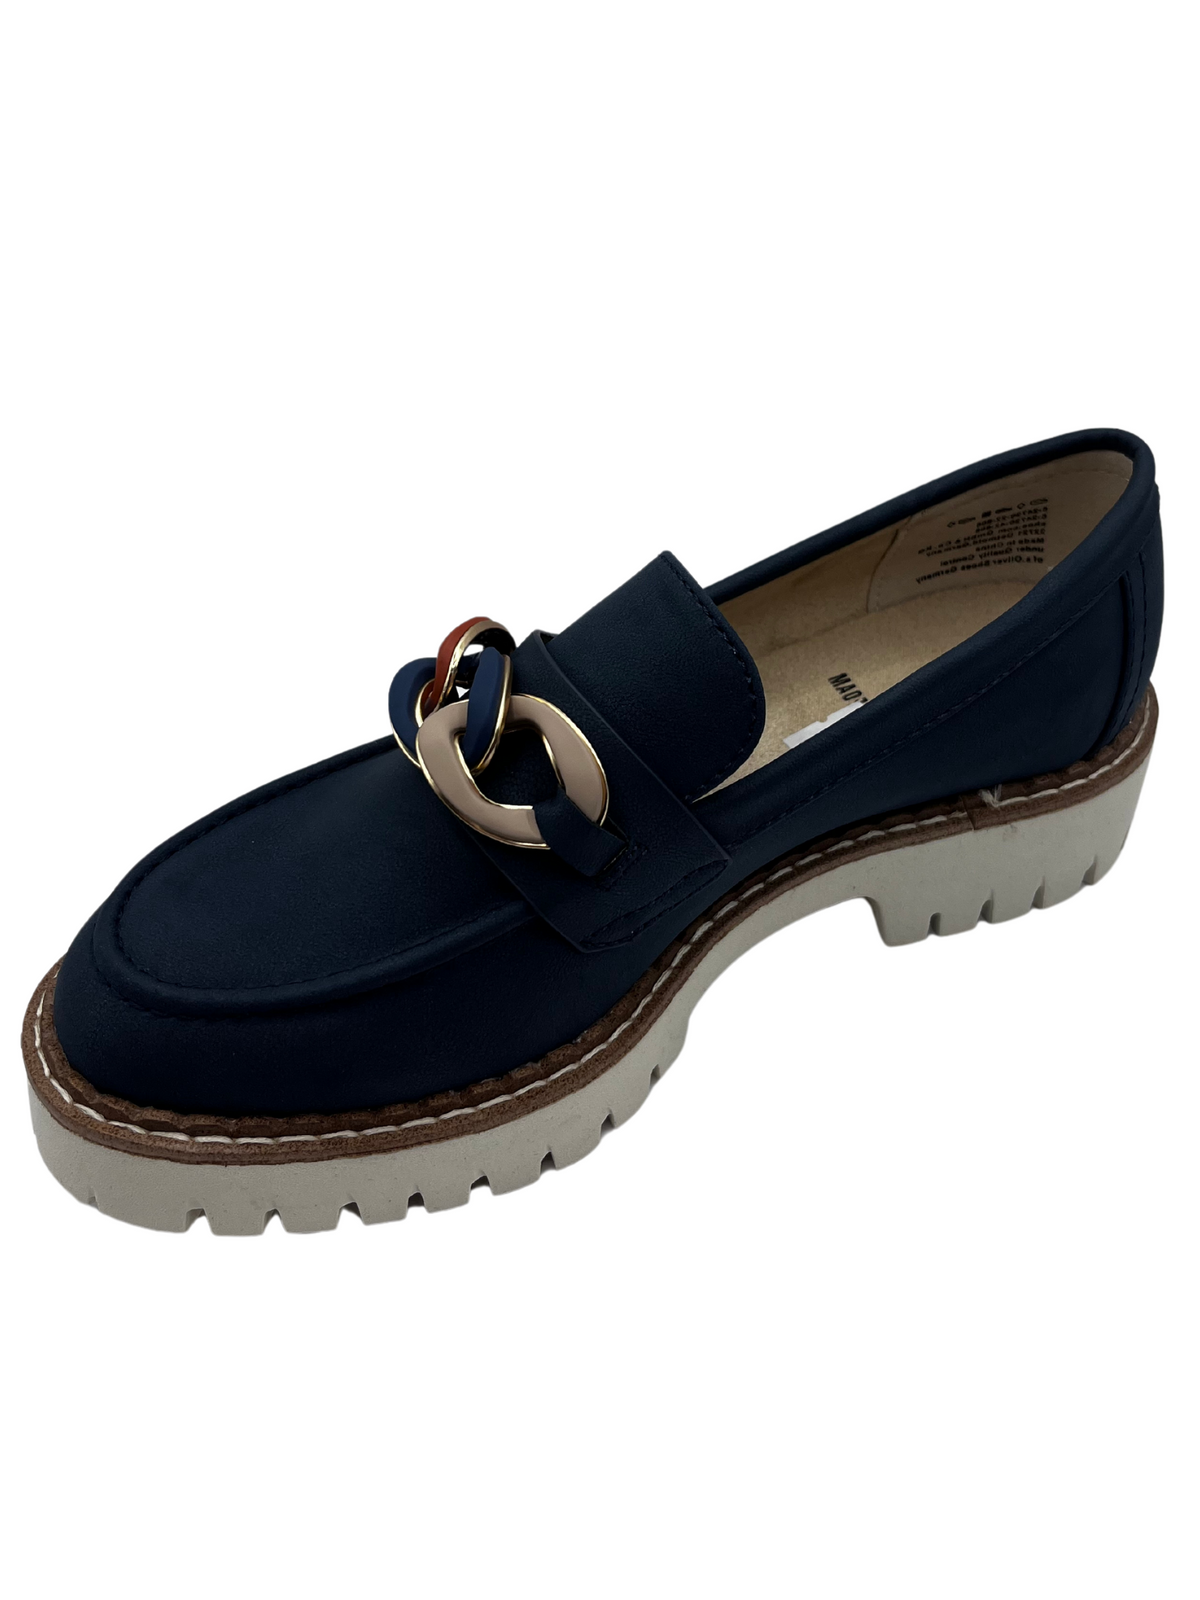 S Oliver Navy Loafer With Colourful Chain Design